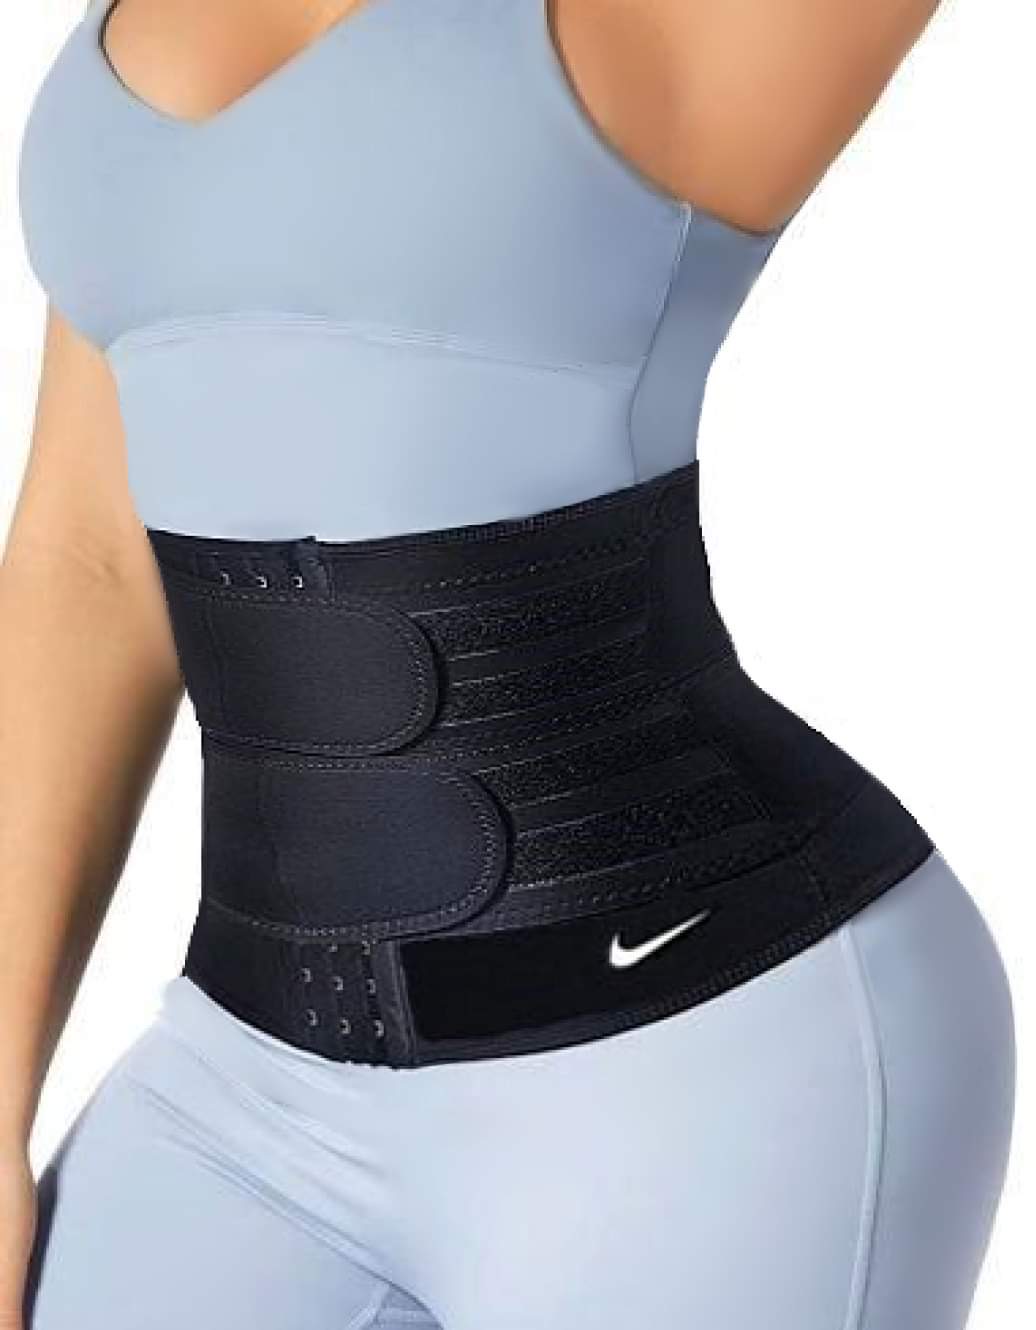 NK2023-8 Sweat Waist Slimmer with Two Belts, 8-INCHES 2mm thick